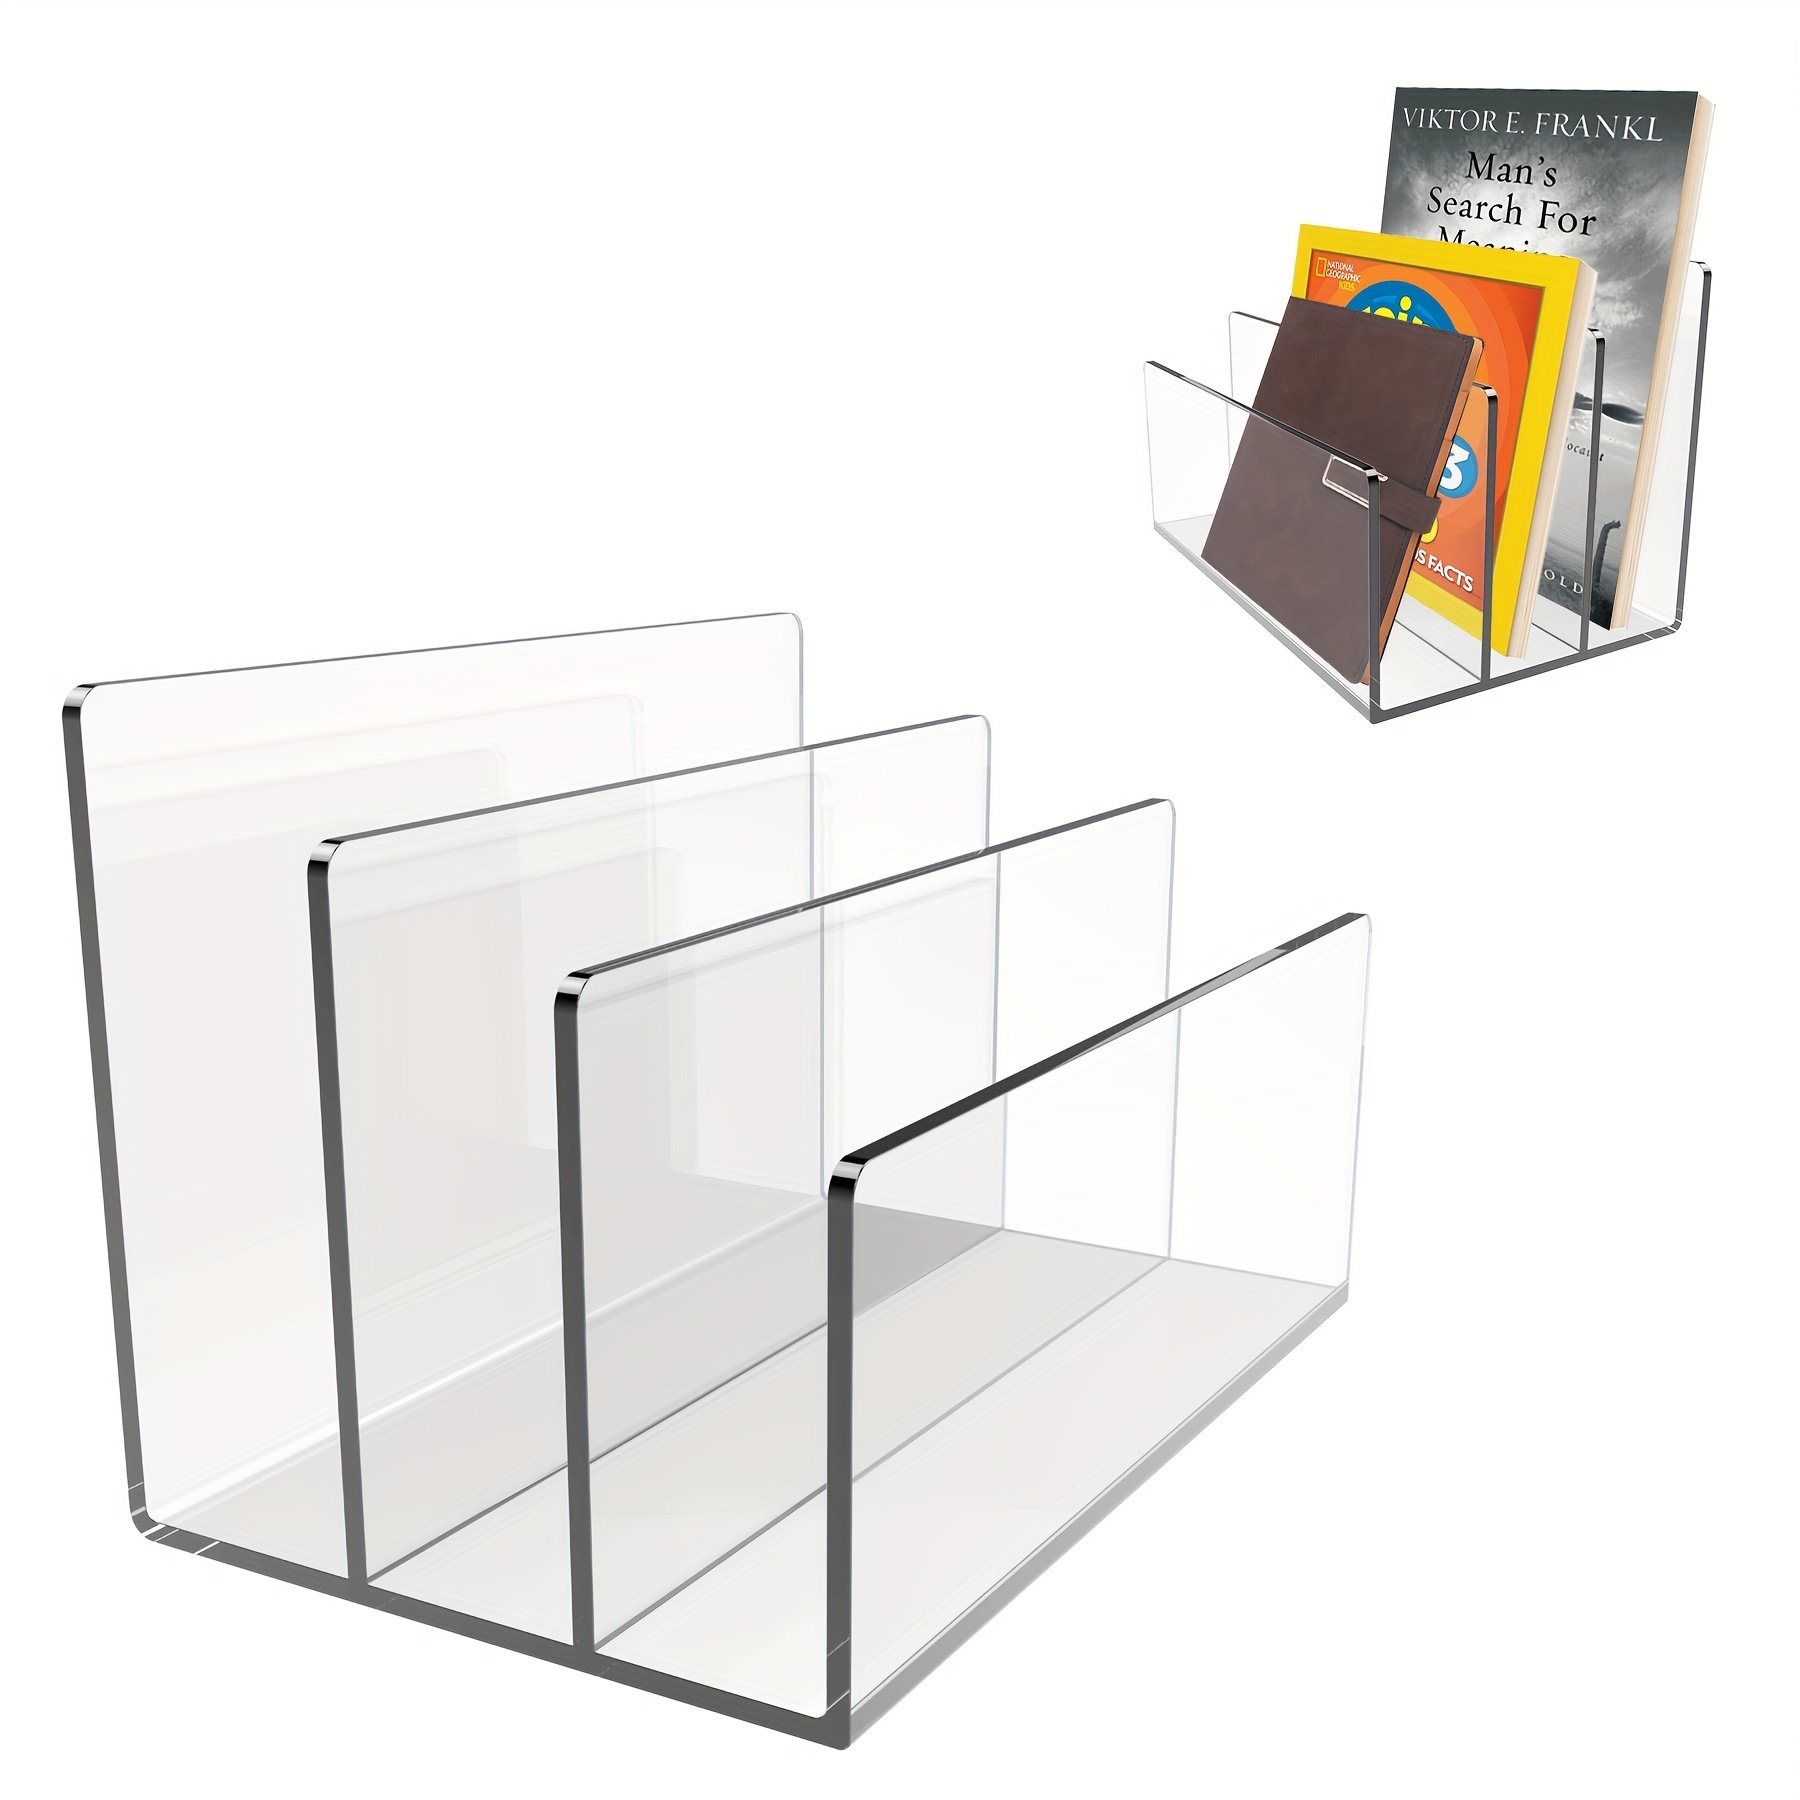  Boloyo Assemble Acrylic Display Stand Without Ledge